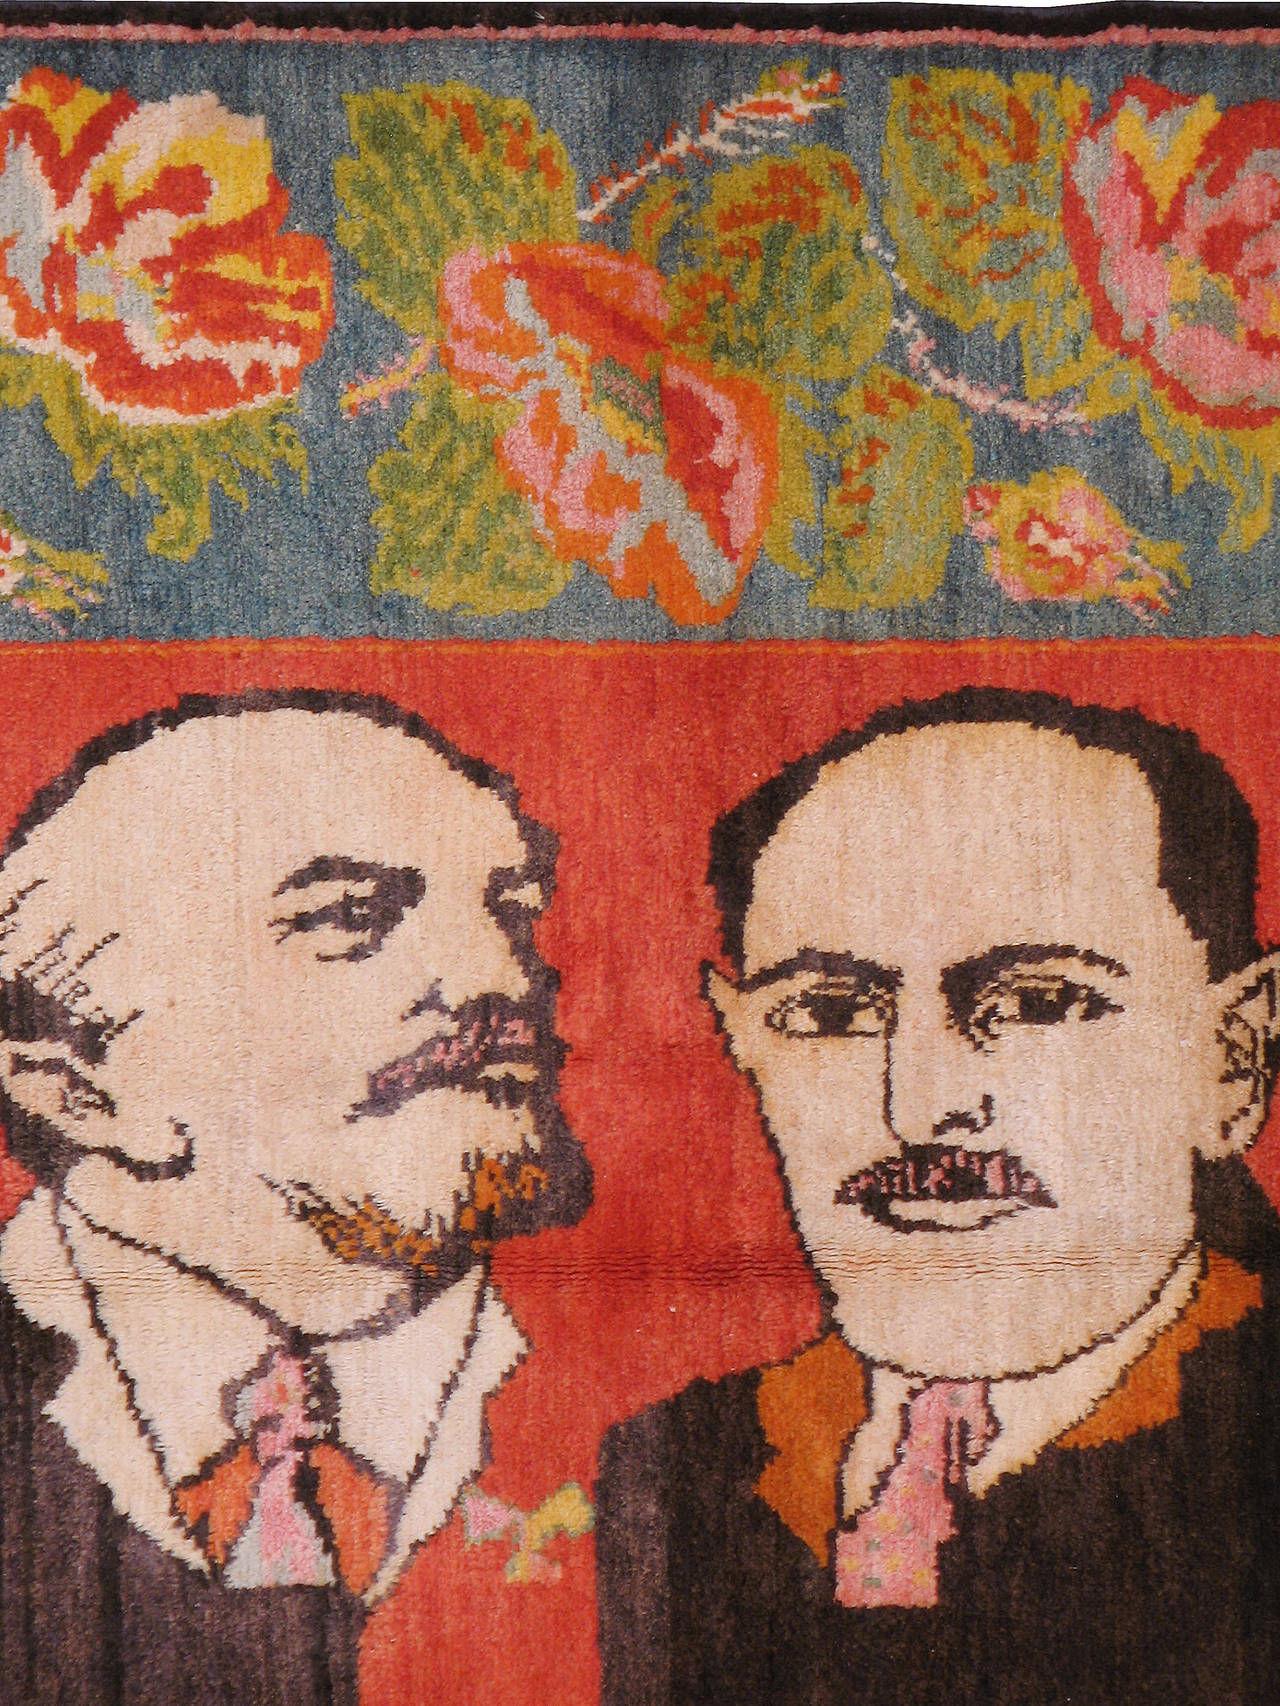 A vintage Russian Karabagh carpet from the second quarter of the 20th century with a pictorial depiction of Vladimir Lenin.